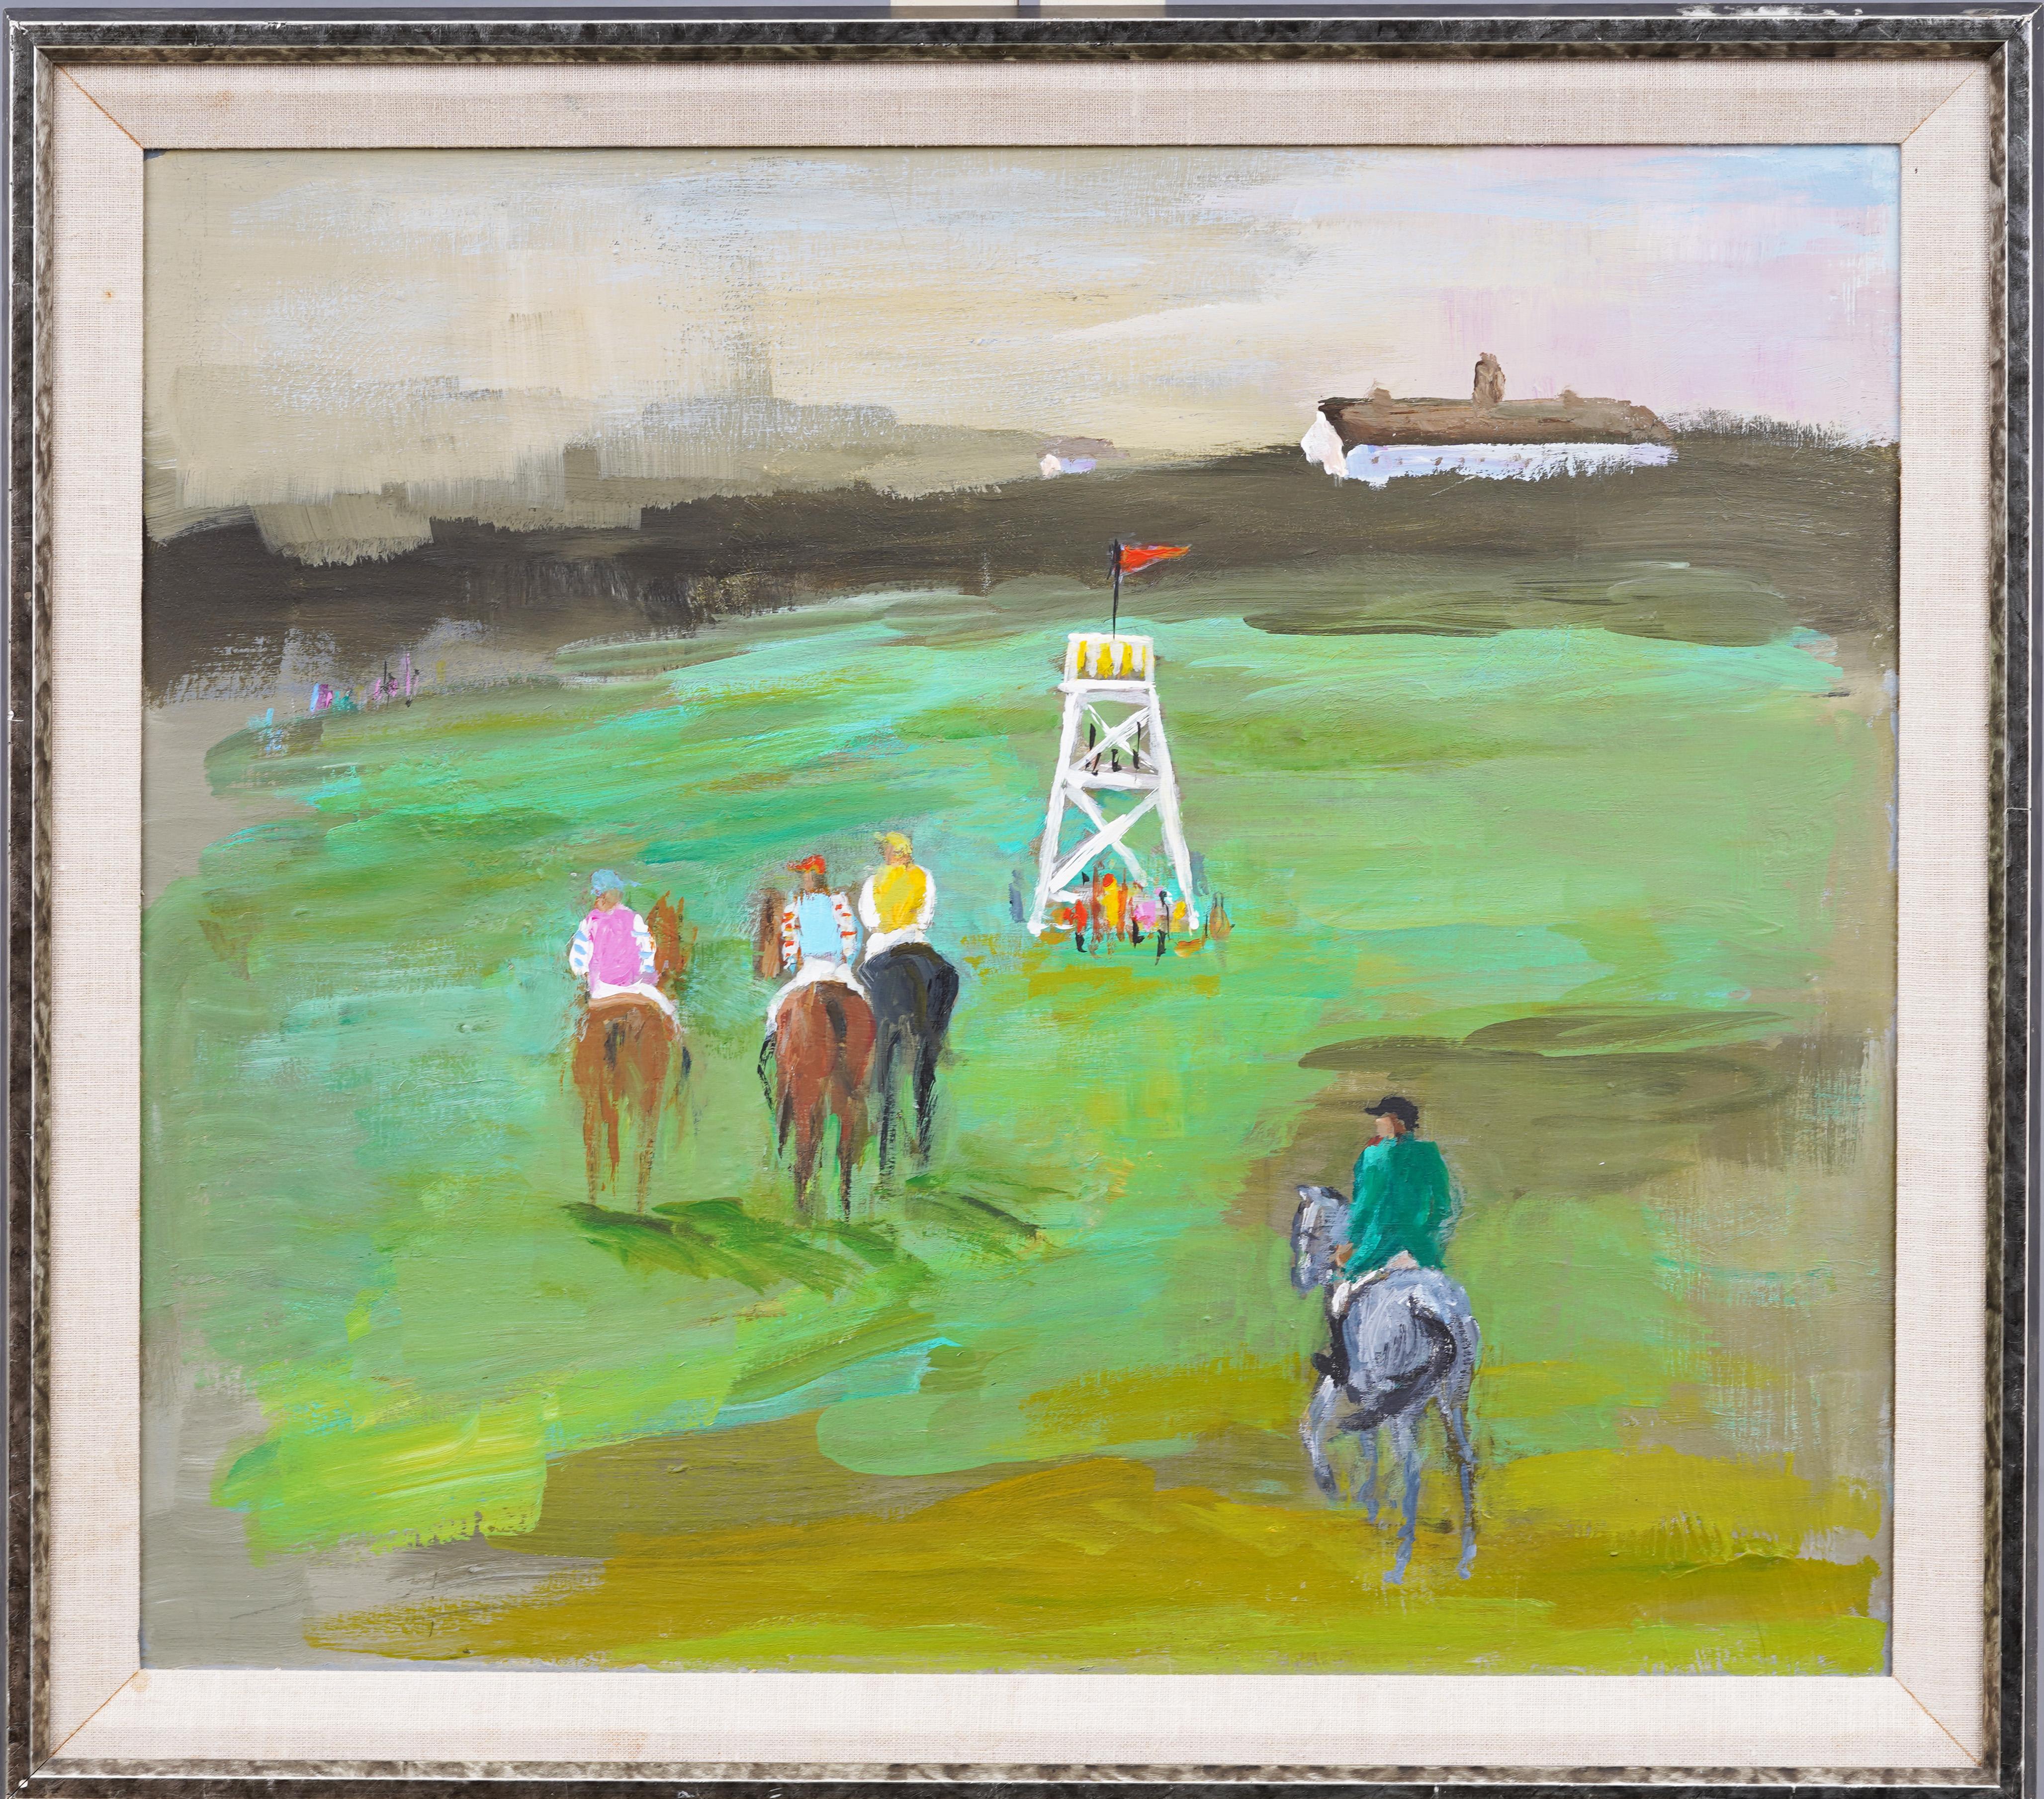 Very impressive mid century polo field modernist landscape.  Oil on canvas.  No signature found.  Framed.